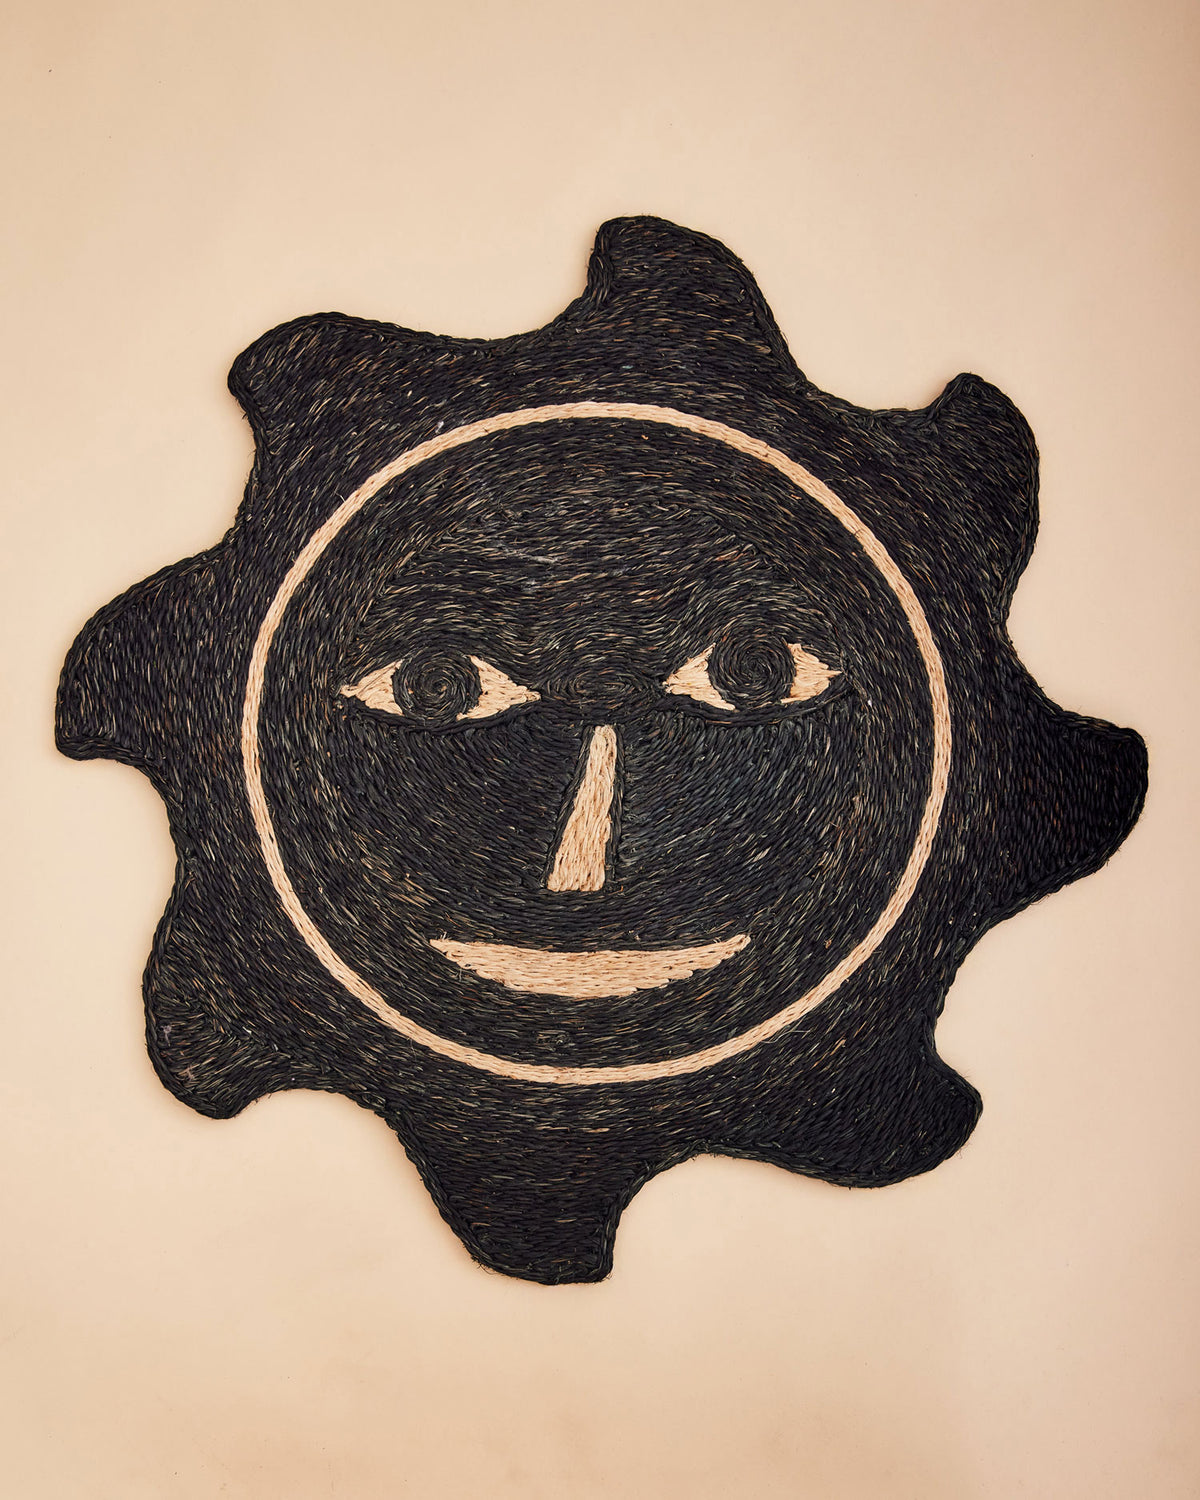 Dusen Dusen Everybody Sun Mat. Doormat made of 100% Handwoven Abaca fiber in the signature Everybody Face design. Made in Philippines. Dry, indoor use is recommended. Vacuum regularly, spot clean as needed.